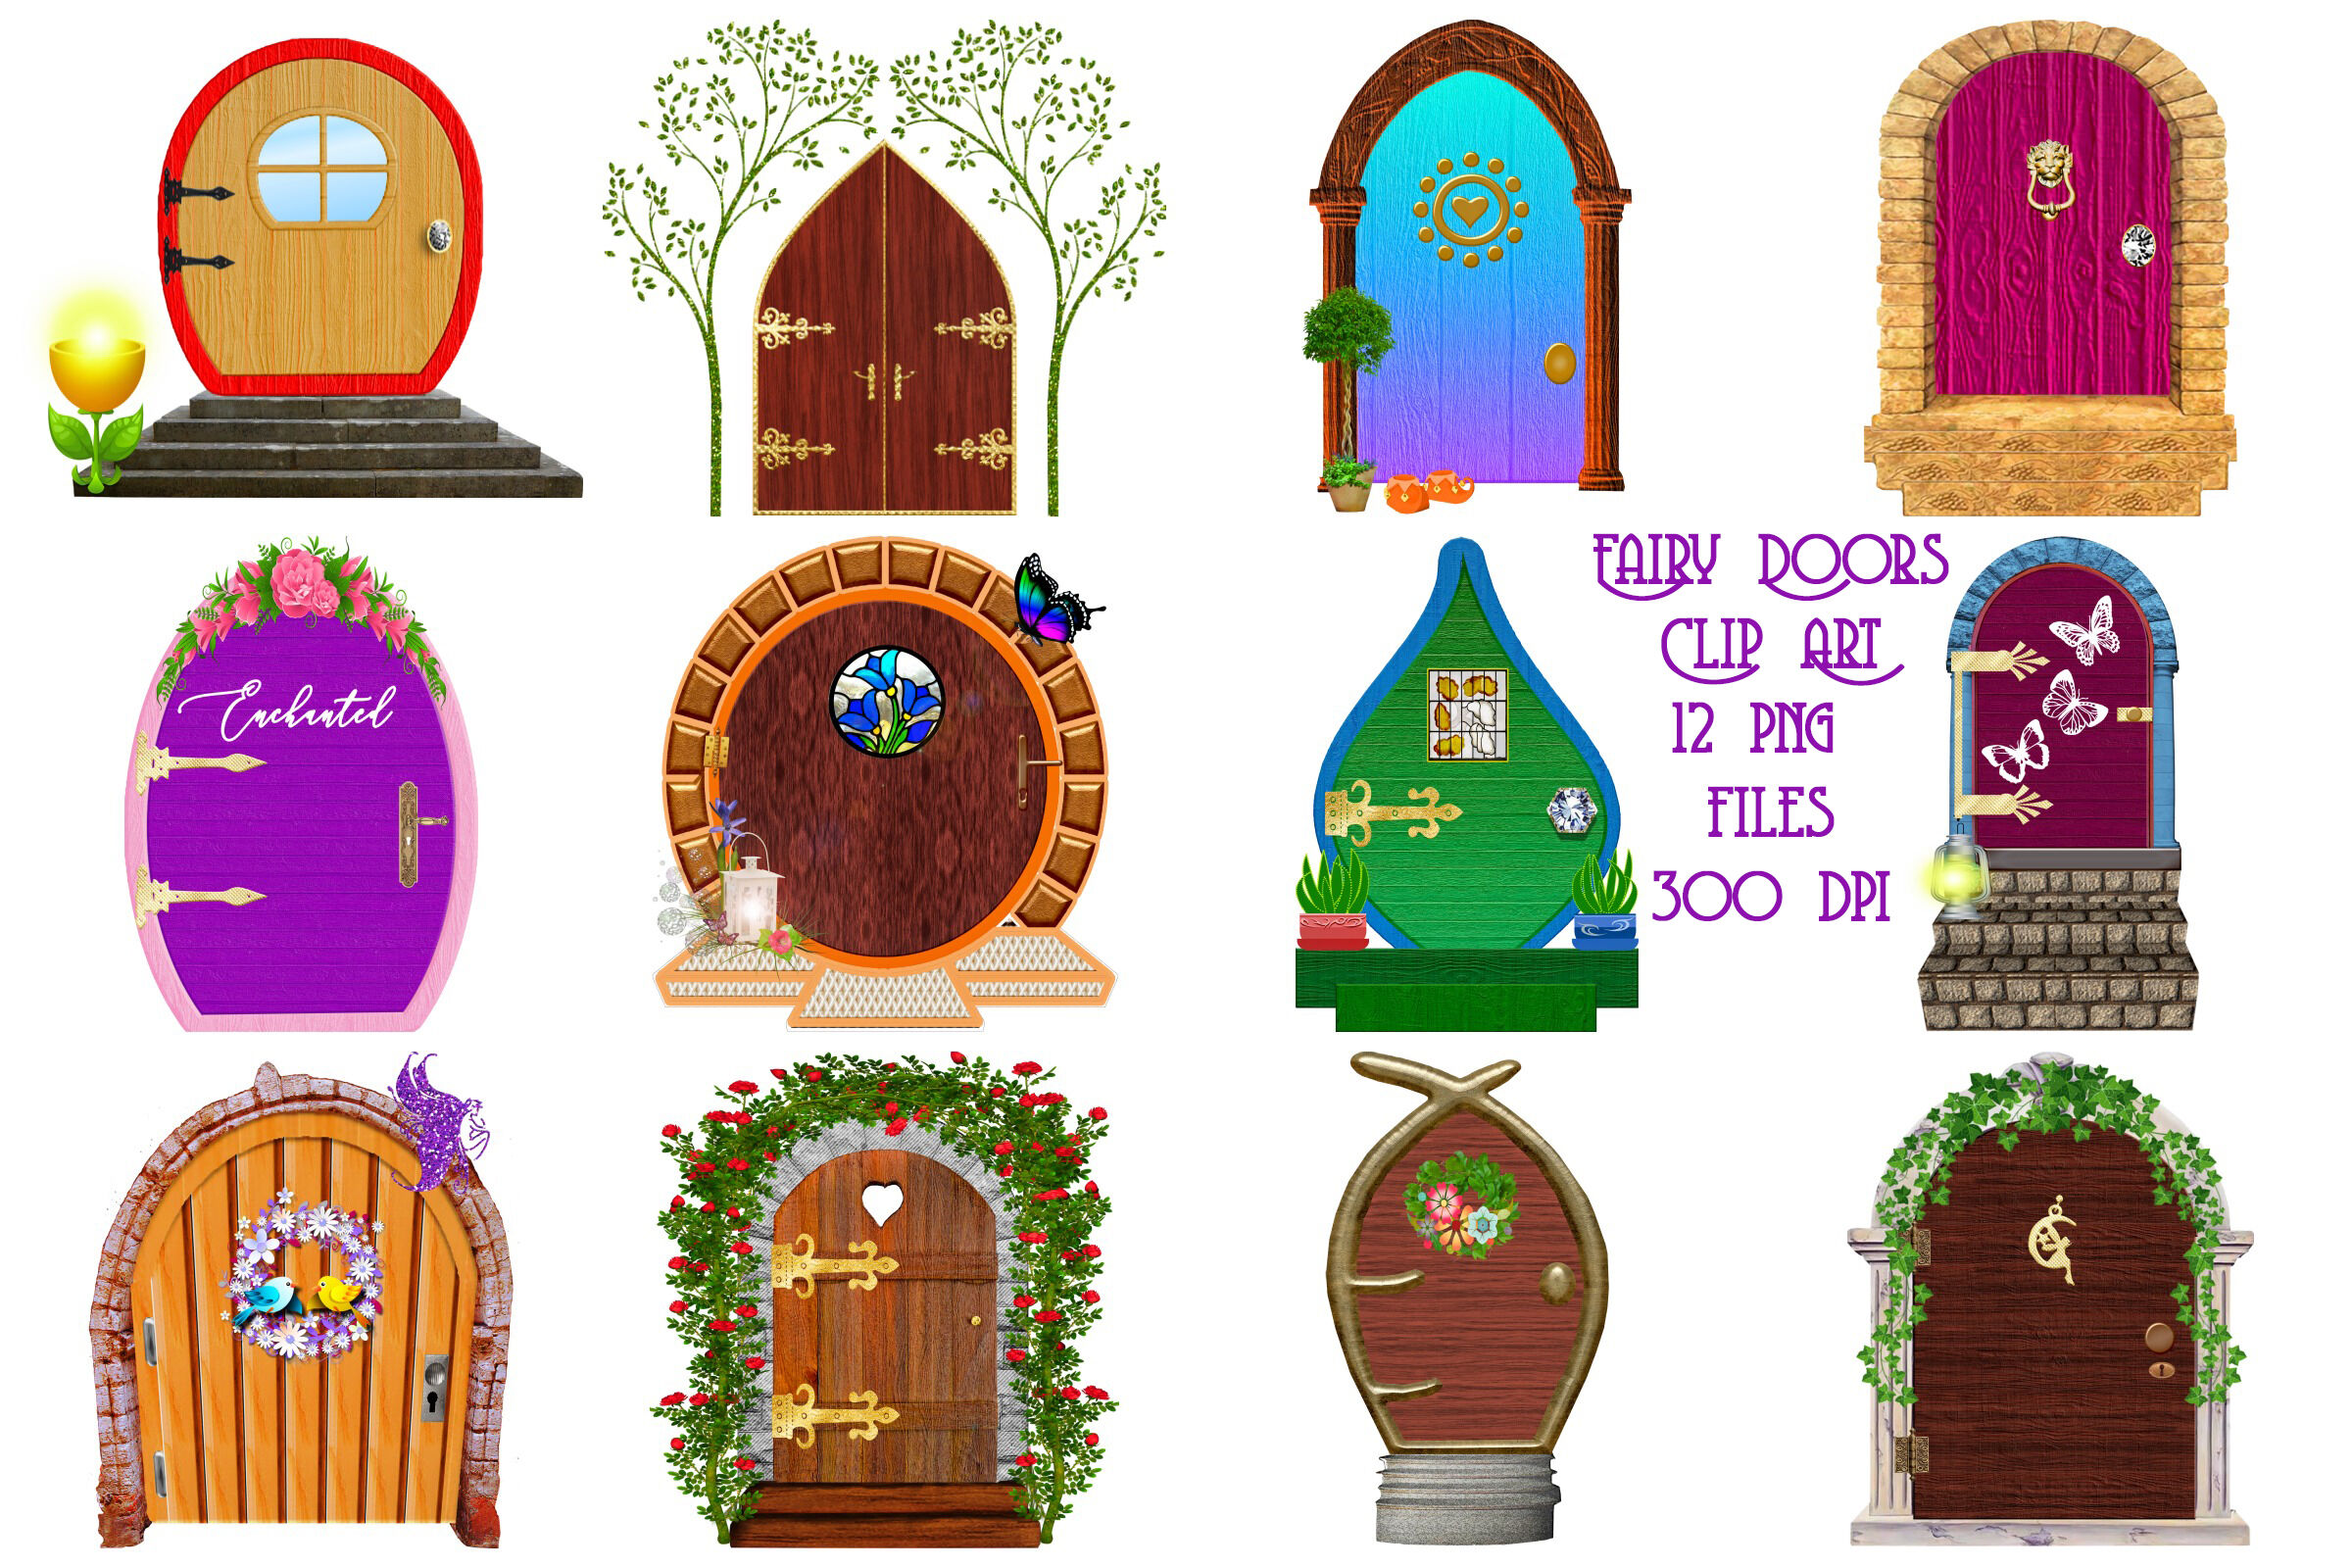 Fairy Doors Clip Art By Me and Ameliè